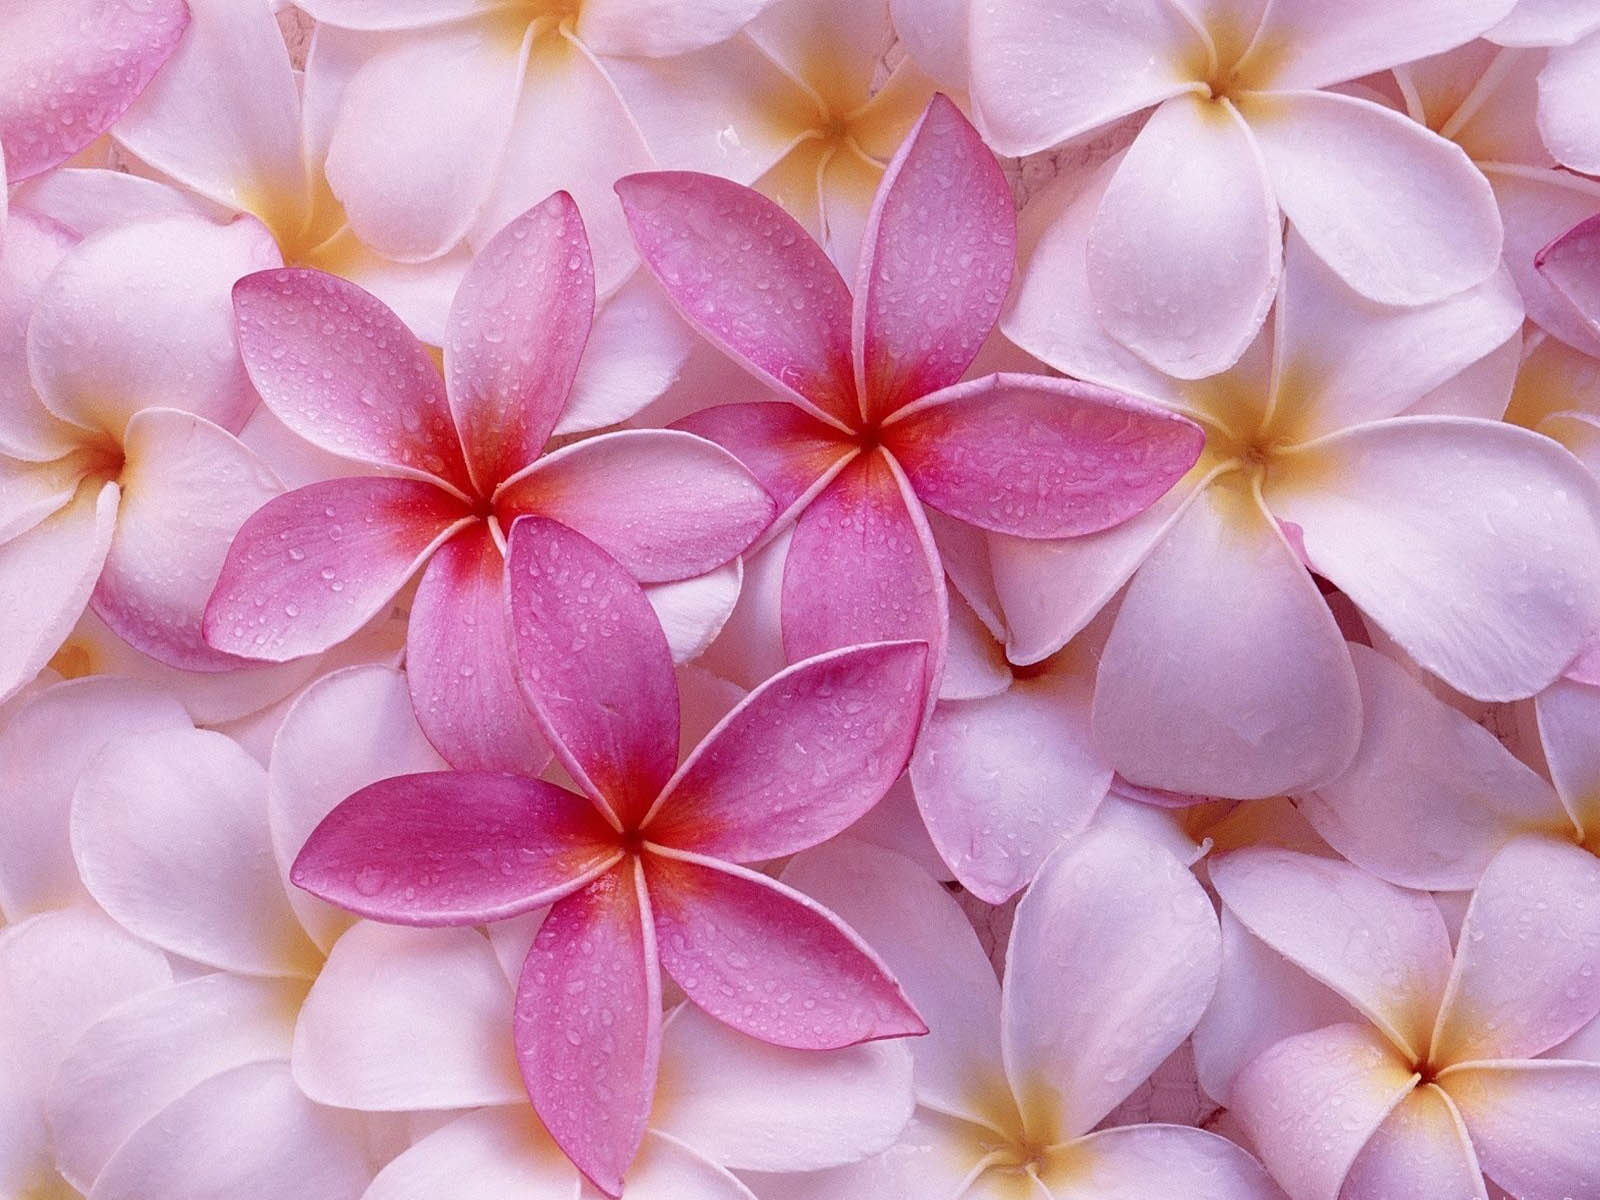 Tag Pink Flowers Wallpapers BackgroundsPhotos Images and Pictures